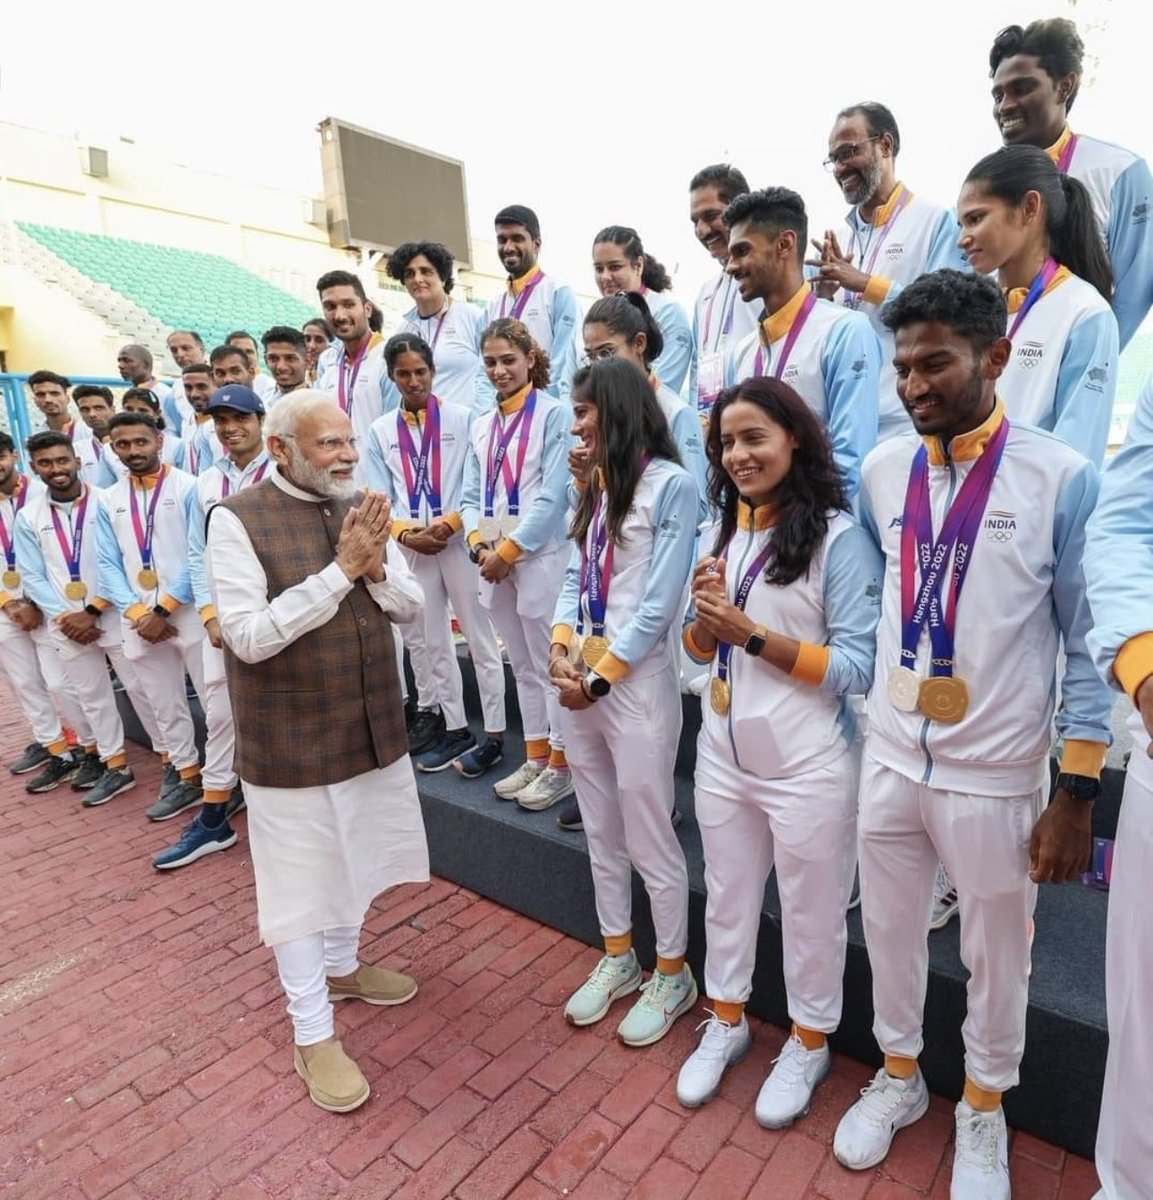 Delighted to meet our honourable Prime Minister Shri.@narendramodi ji 😊Thank you so much for taking your valuable time to meet and greet the 2022 Asian games contingent. Your support has immensely contributed towards the development of our Indian sporting ecosystem.